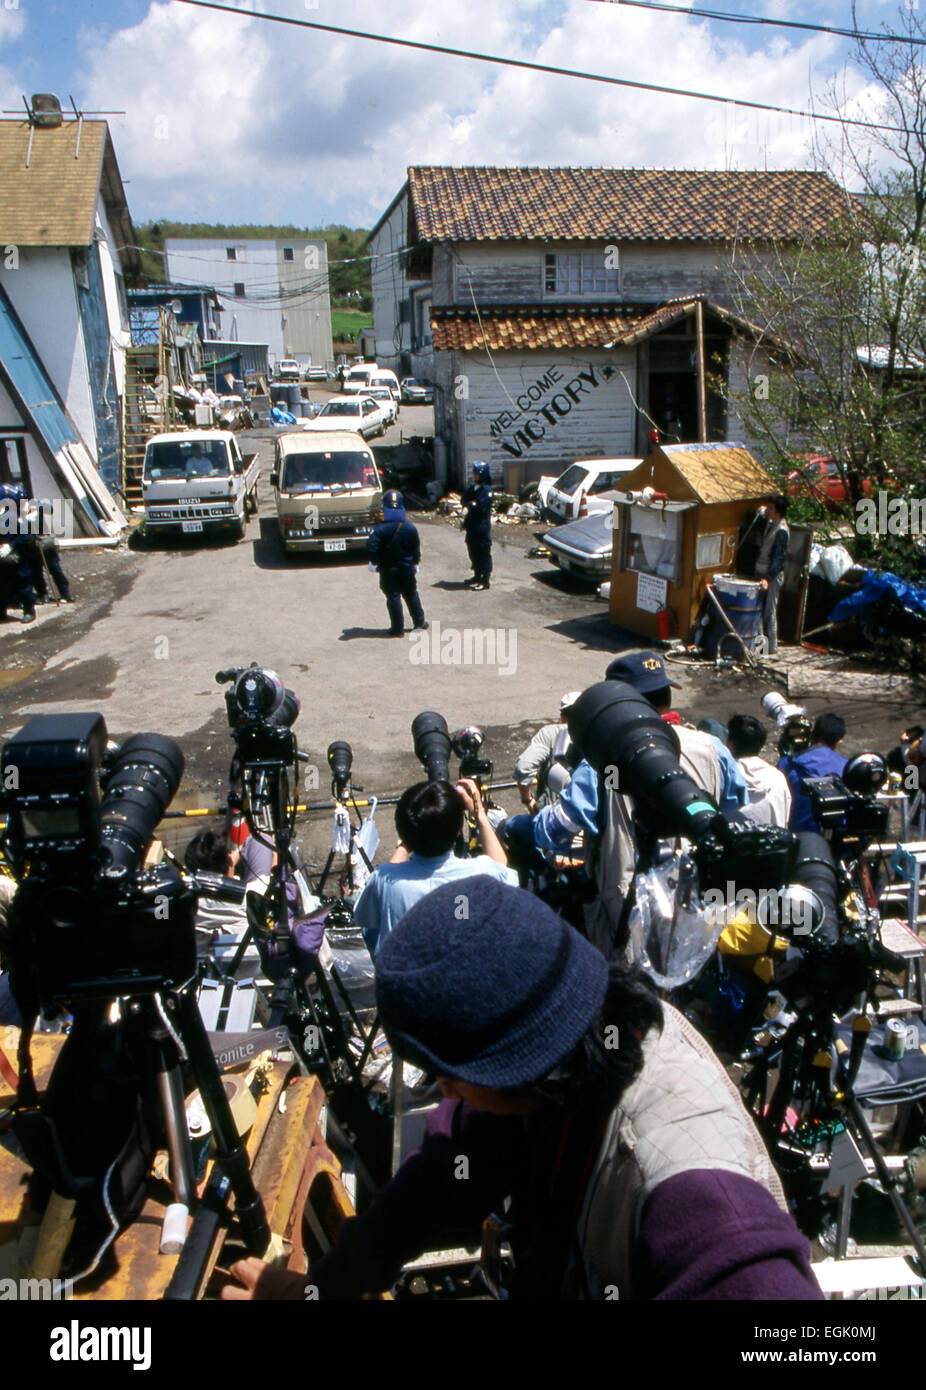 Kamikuisshiki Mura, Japan - Members of the domestic and foreign media take up their position as police raid Aum Shinriko's facility - No. 6 Satyam. 16th May, 1995. on the foot of Mt. Fuji on May 16, 1995. On the morning of 20 March 1995, cult members released sarin in a coordinated attack on five trains in the Tokyo subway system, killing 13 commuters, seriously injuring 54 and affecting 980 more. Some estimates claim as many as 6,000 people were injured by the sarin. © Haruyoshi Yamaguchi/AFLO/Alamy Live News Stock Photo